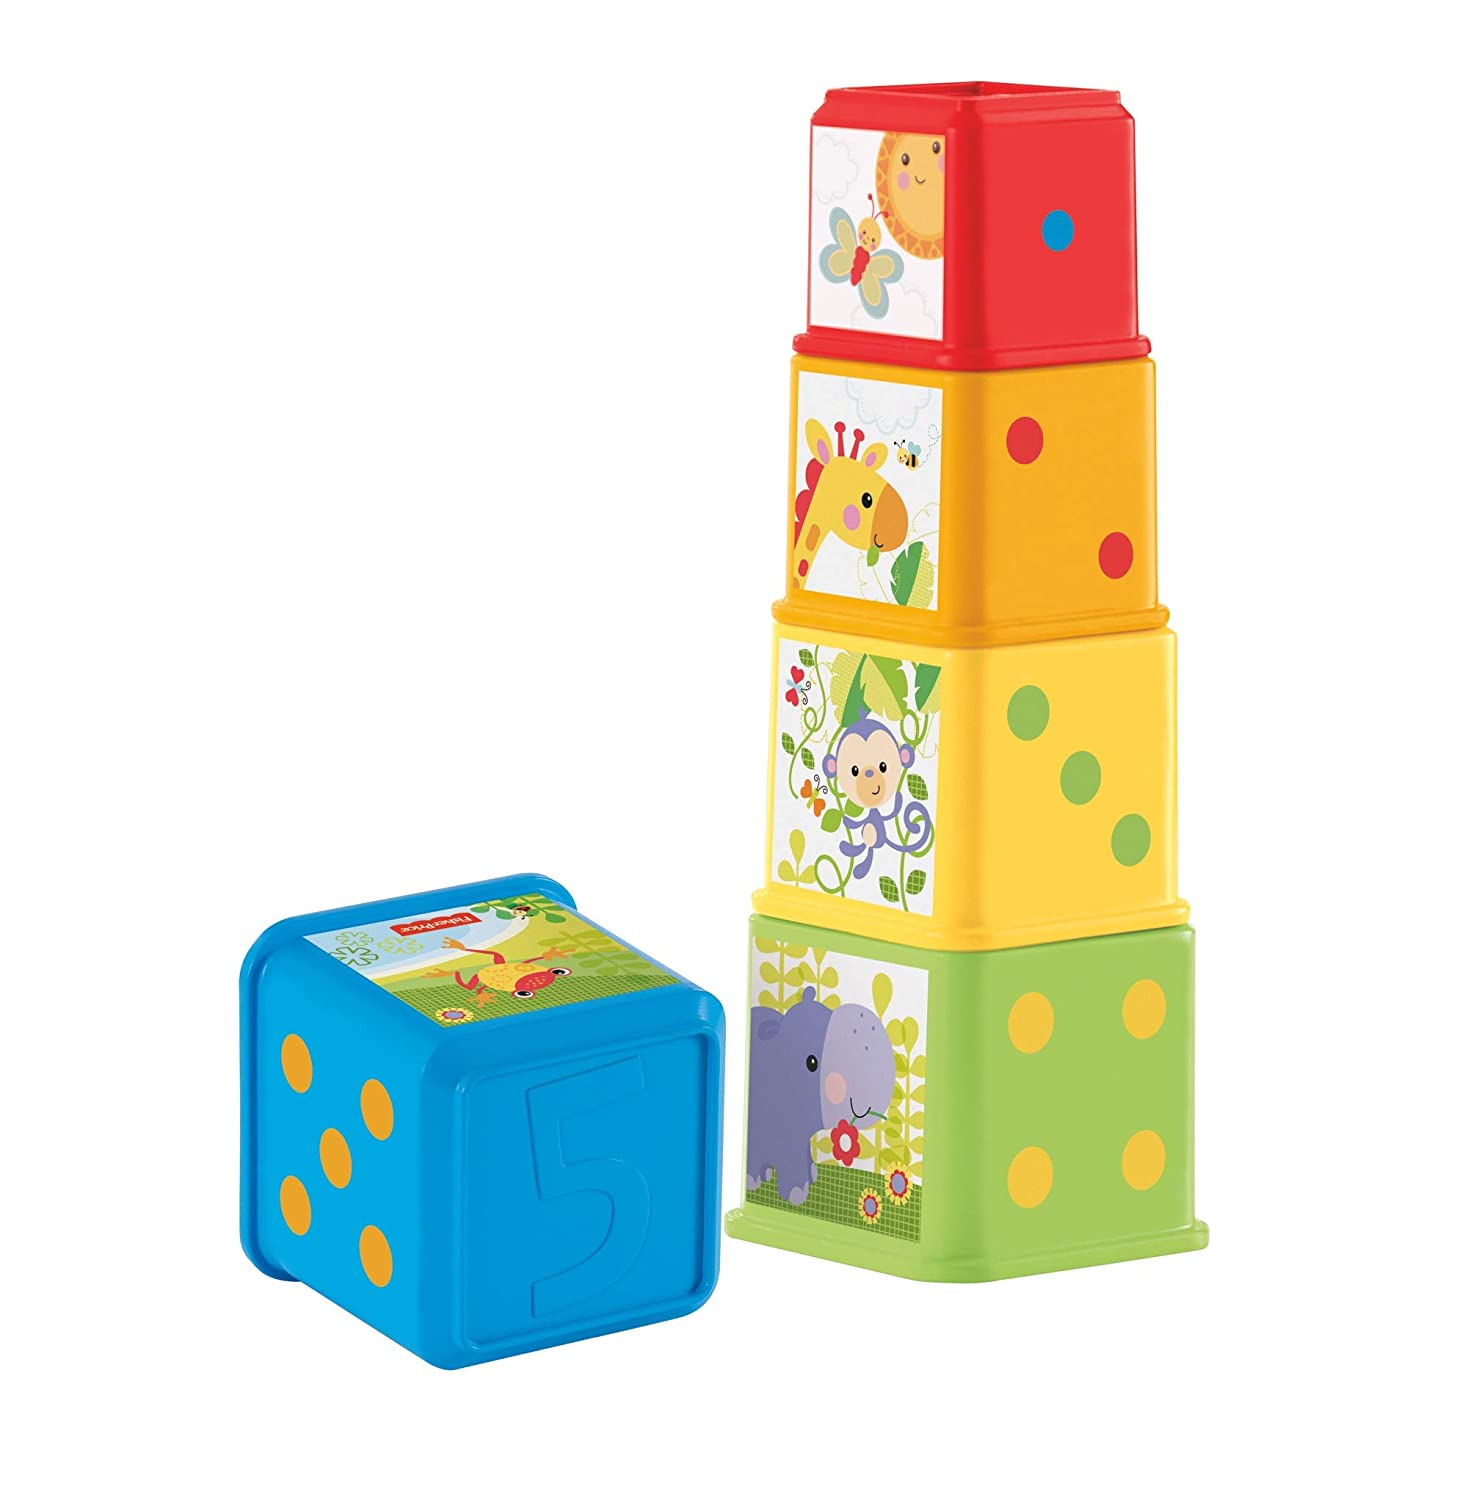 Top 9 Best Baby Stacking Toys Reviews in 2022 3